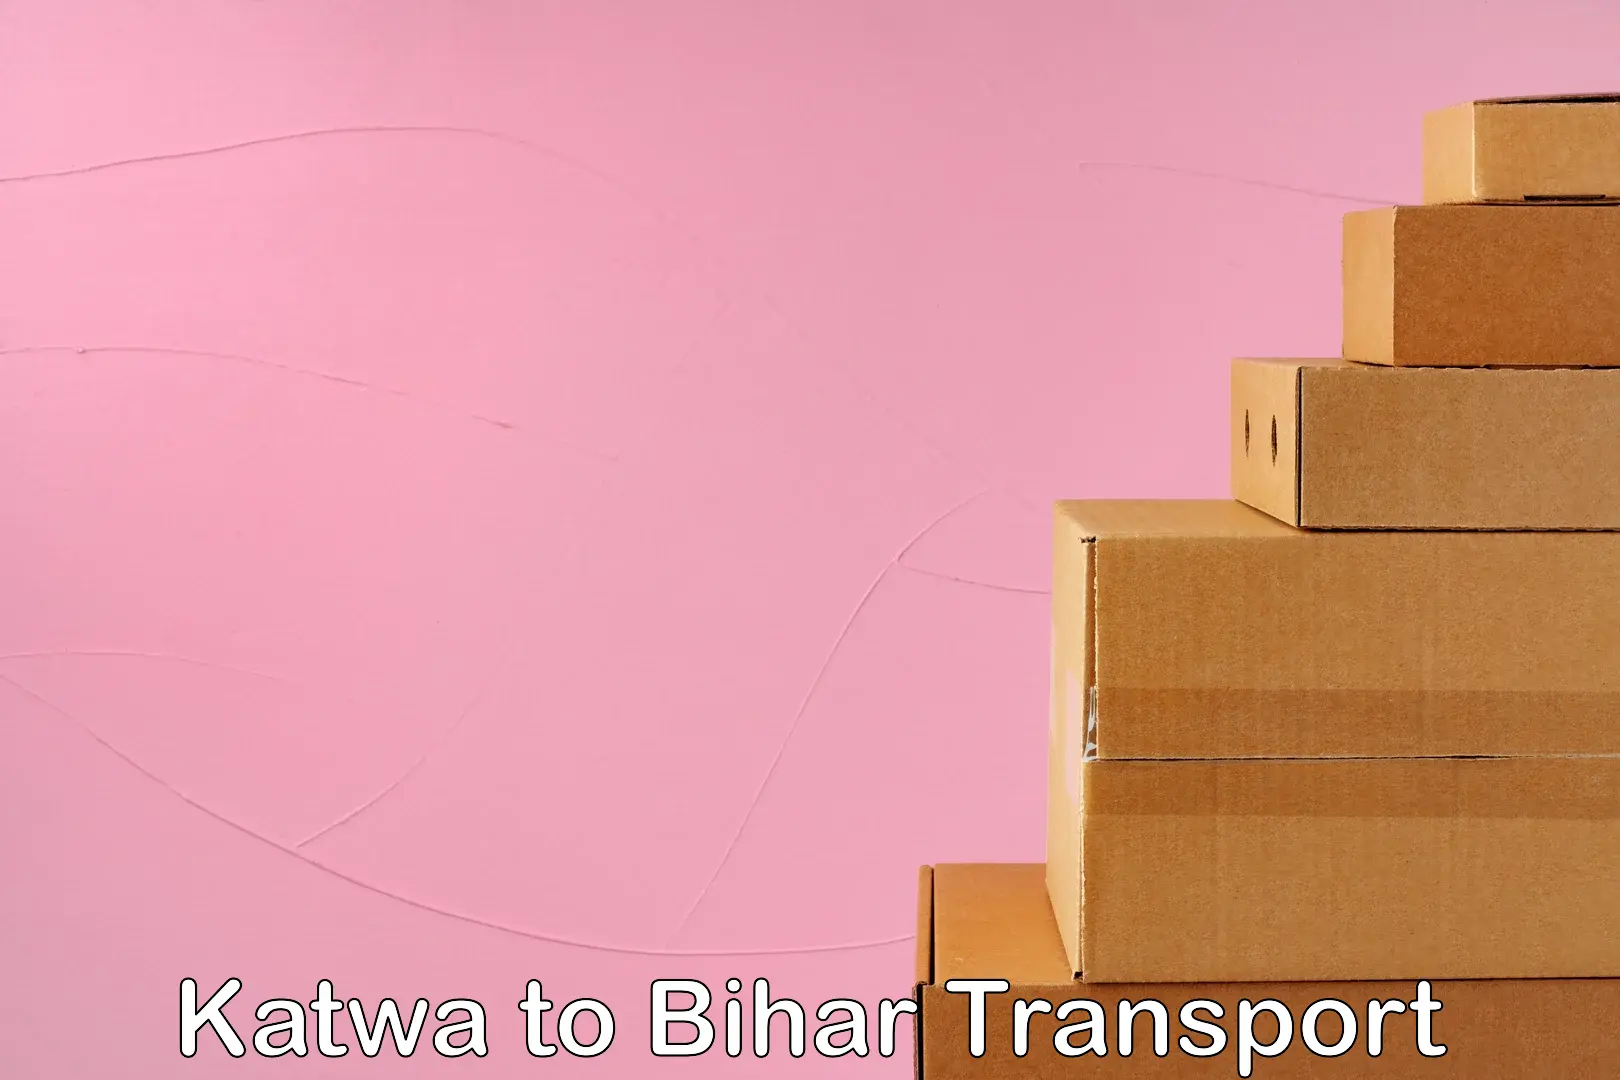 Cargo transport services in Katwa to Bihar